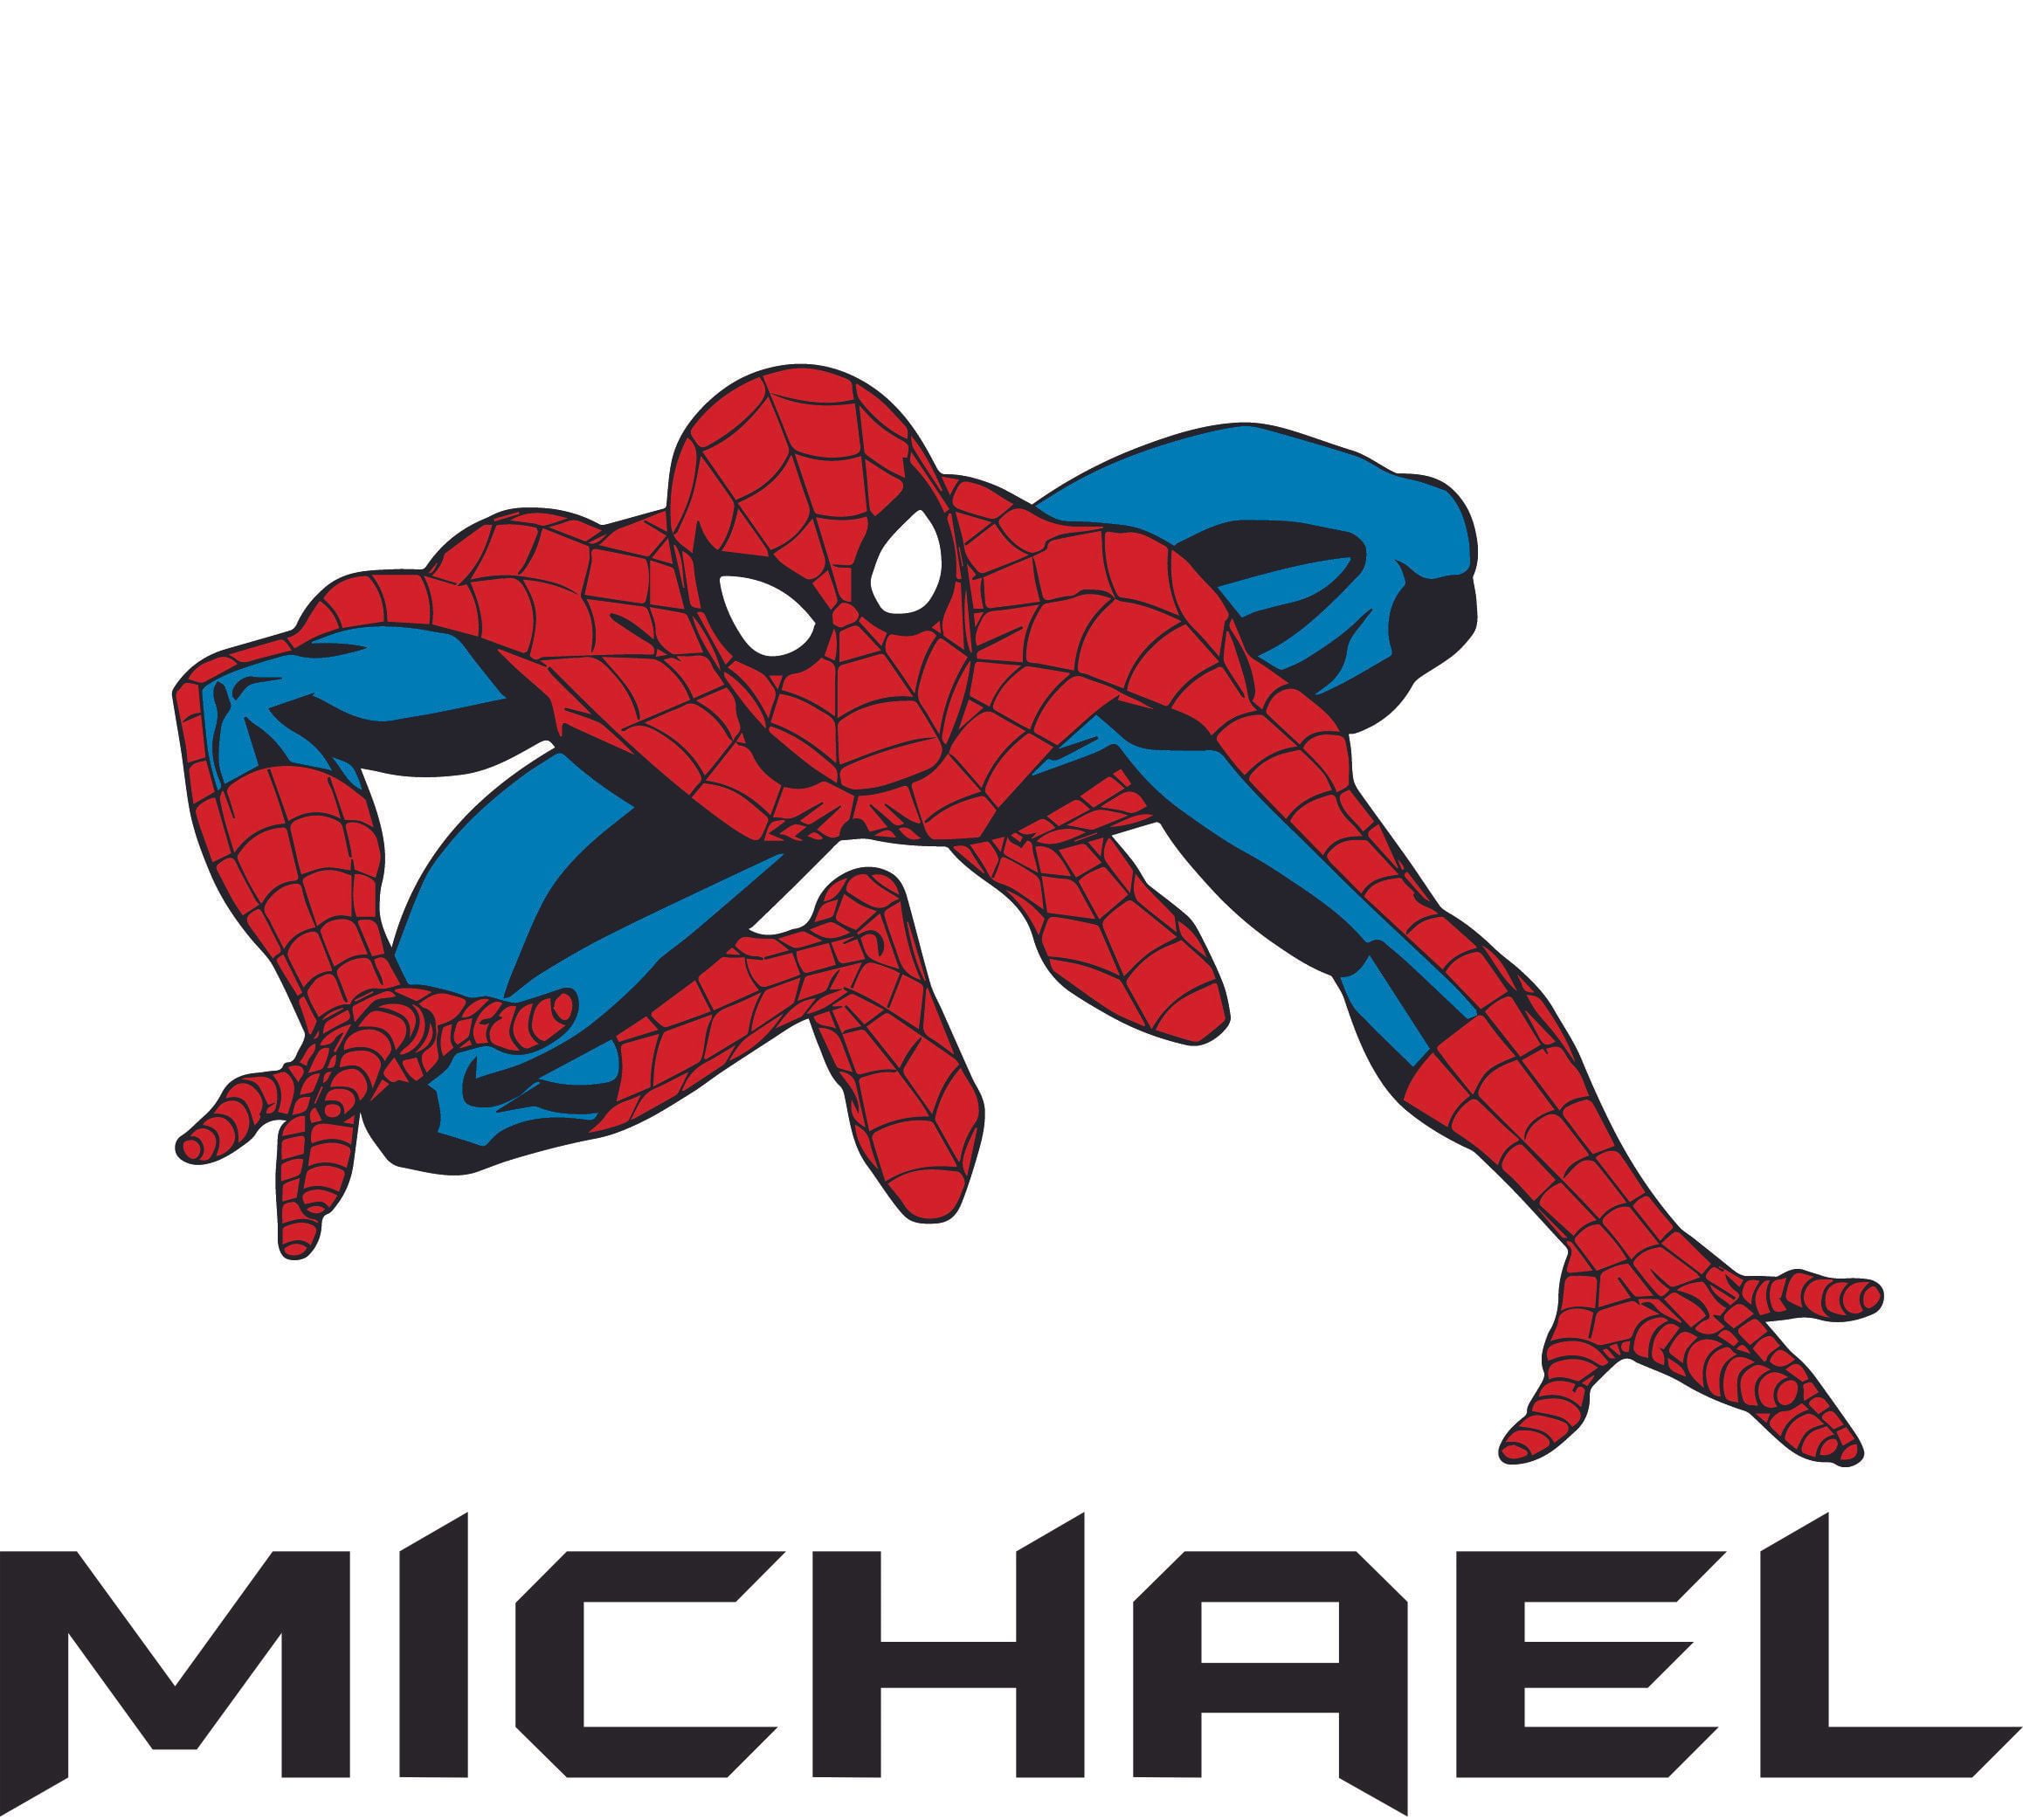 Spiderman door sticker PERSONALISED WITH YOUR NAME Lego Marvel